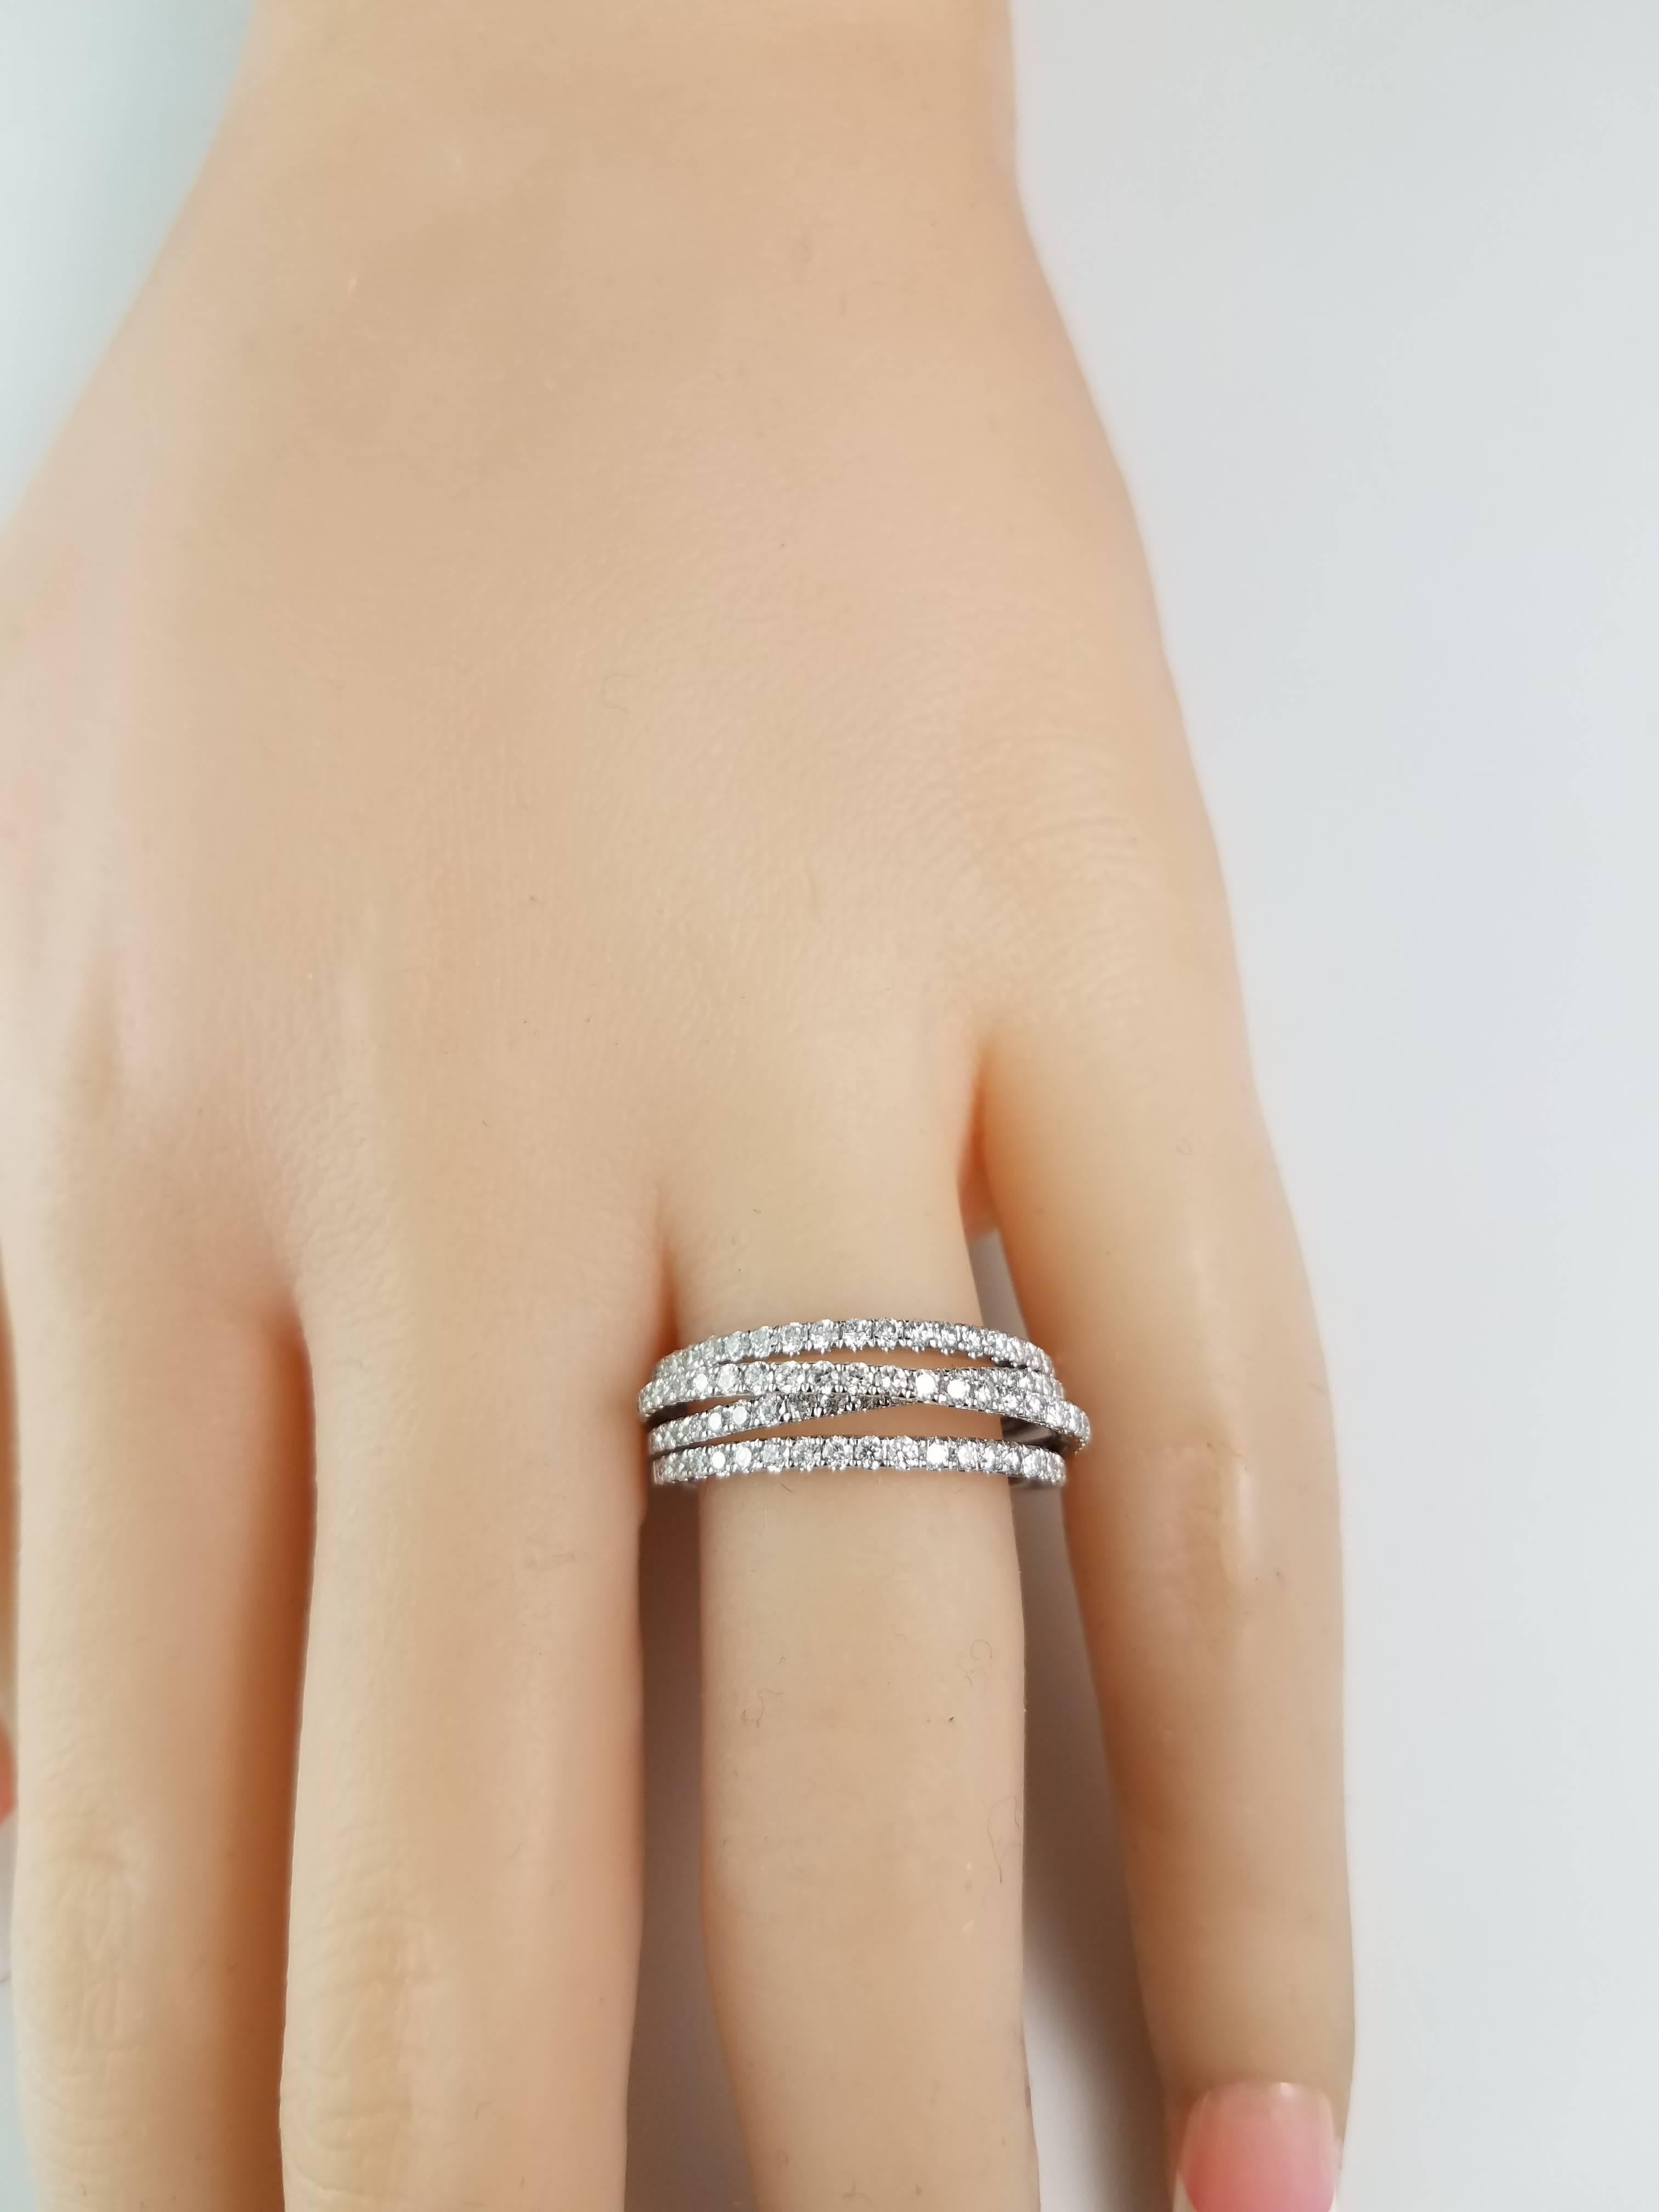 entwined diamond bands